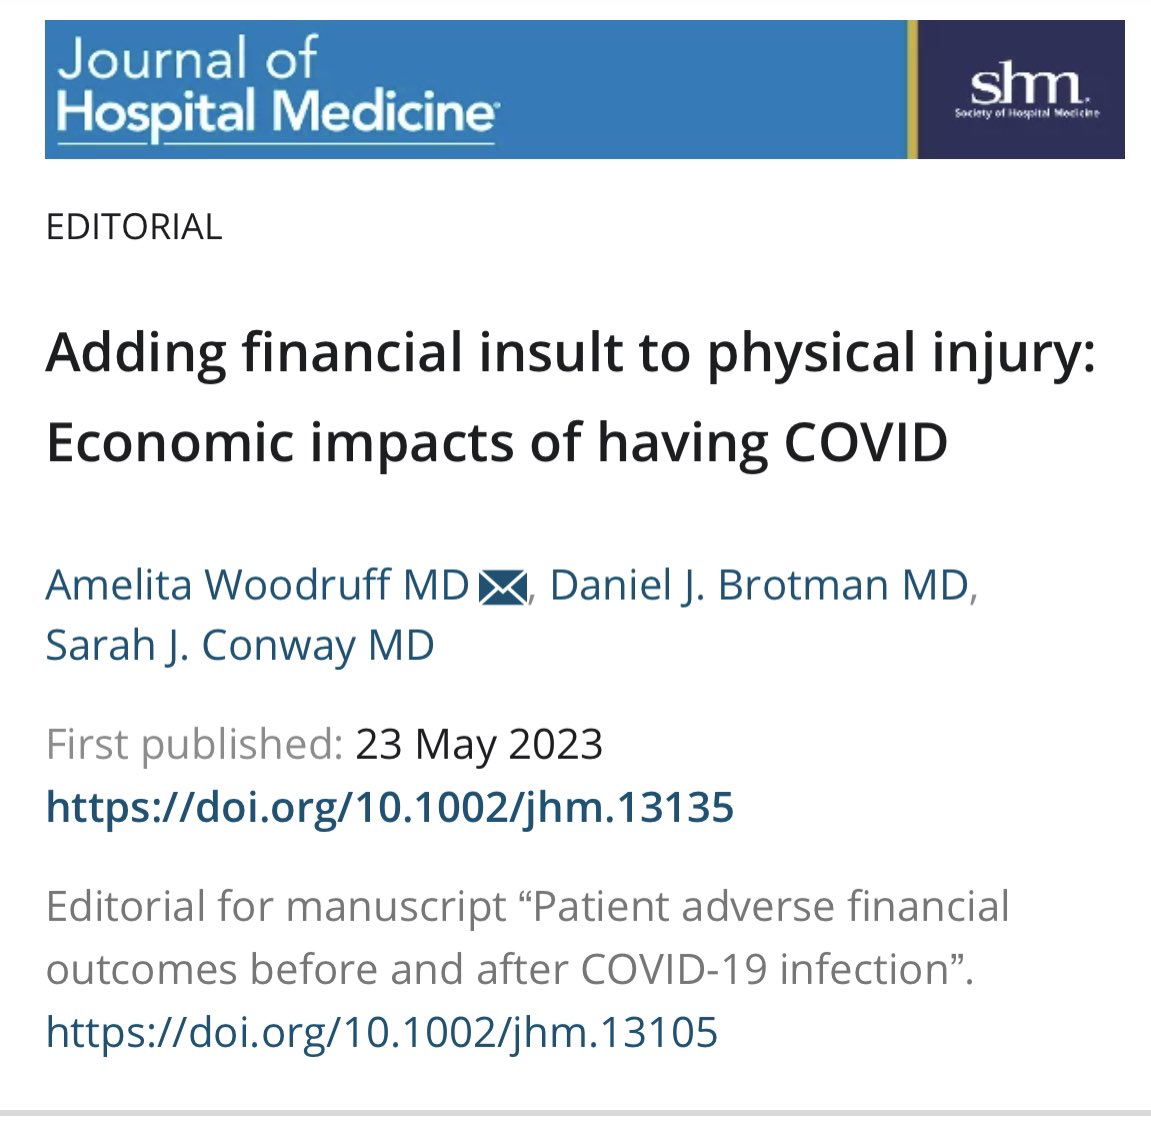 Thanks to the @JHospMedicine for publishing our editorial on the lasting financial impacts of #COVID-19 infection #healthdisparities #SHM